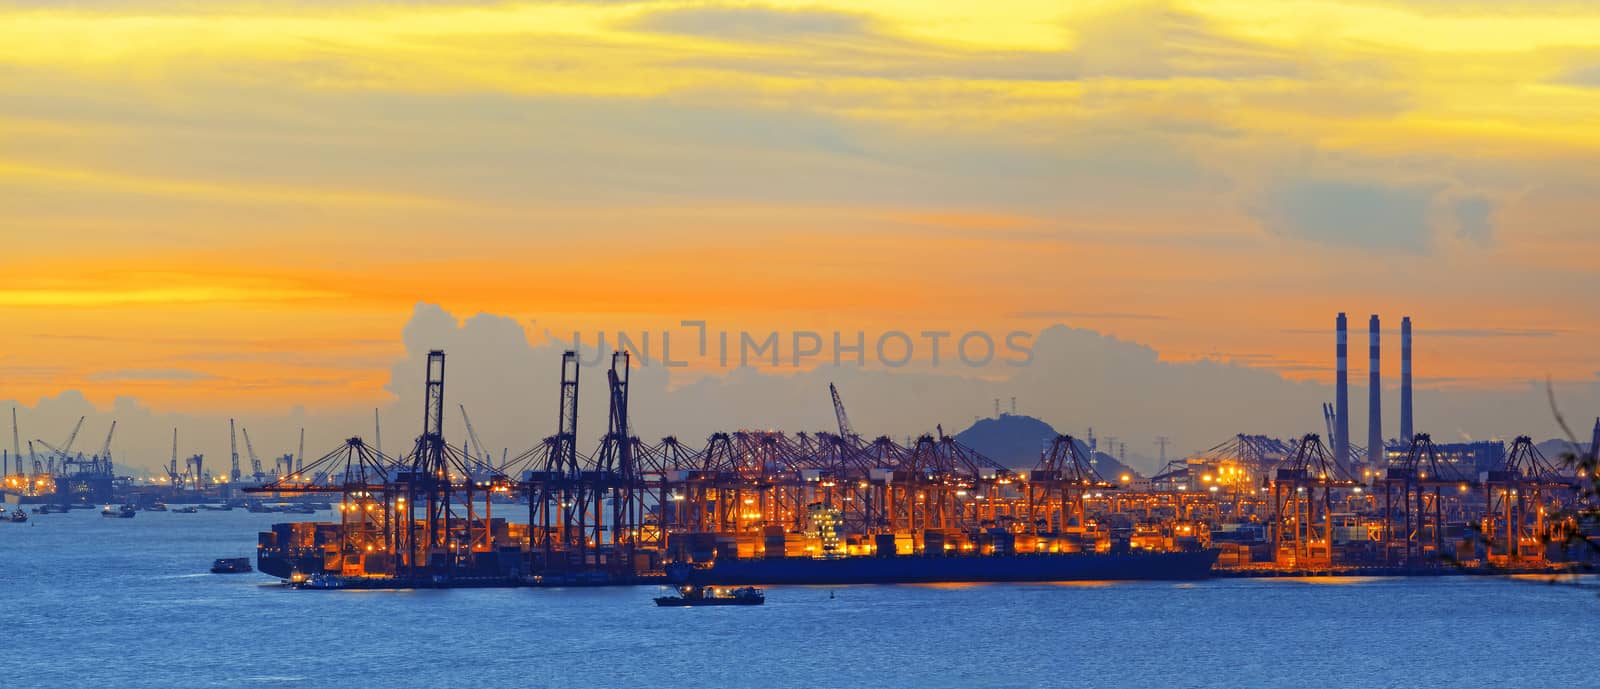 Silhouette of several cranes in a harbor, shot during sunset.